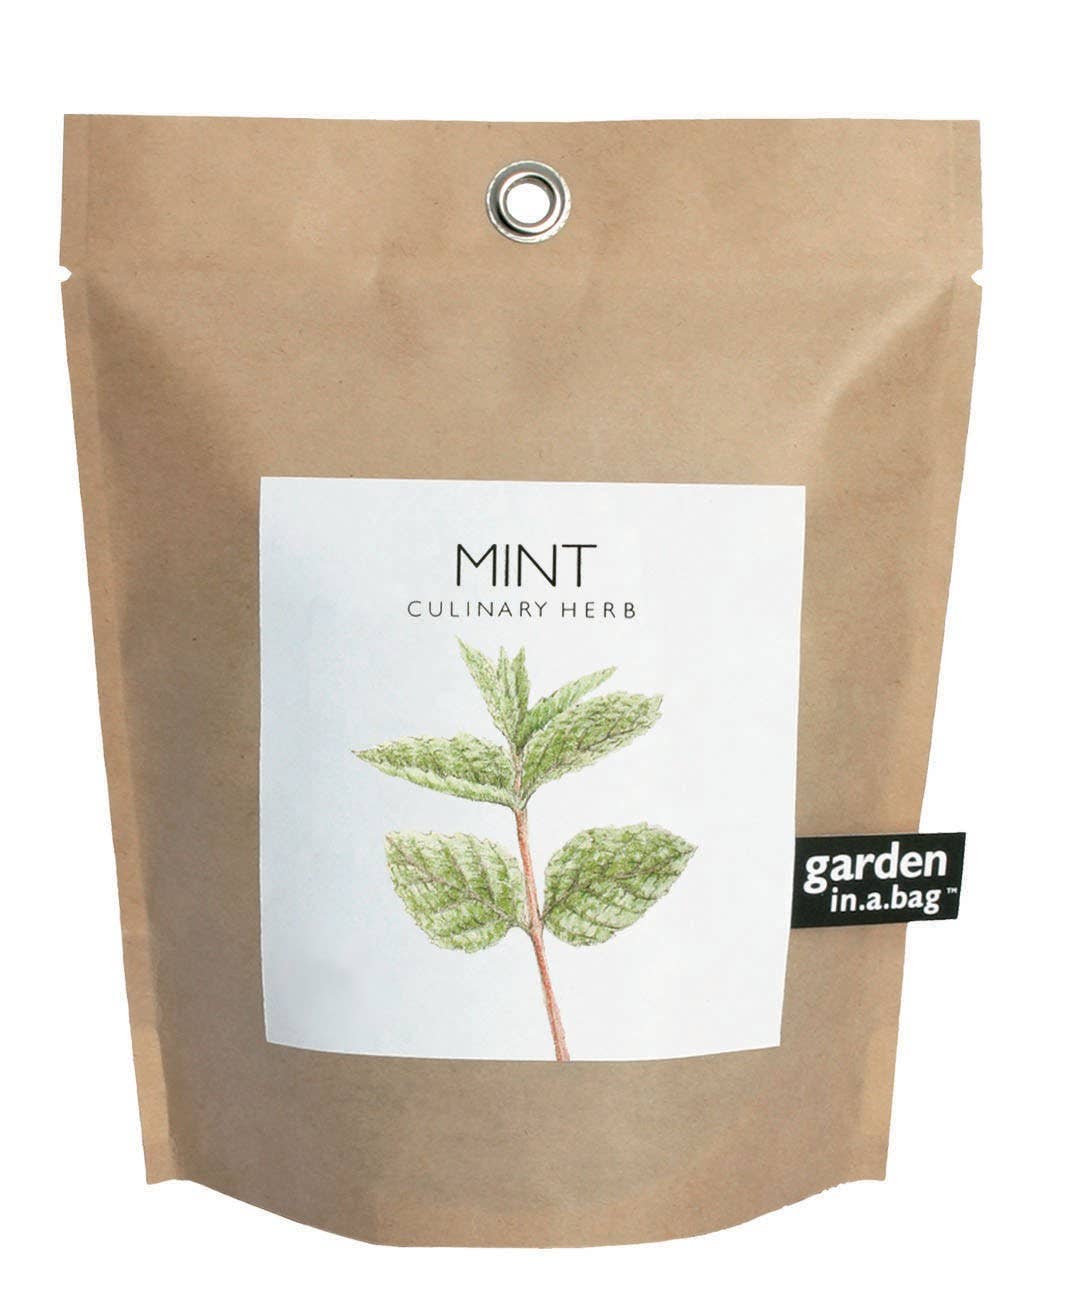 Potting Shed Creations, Ltd. - Garden in a Bag | Mint